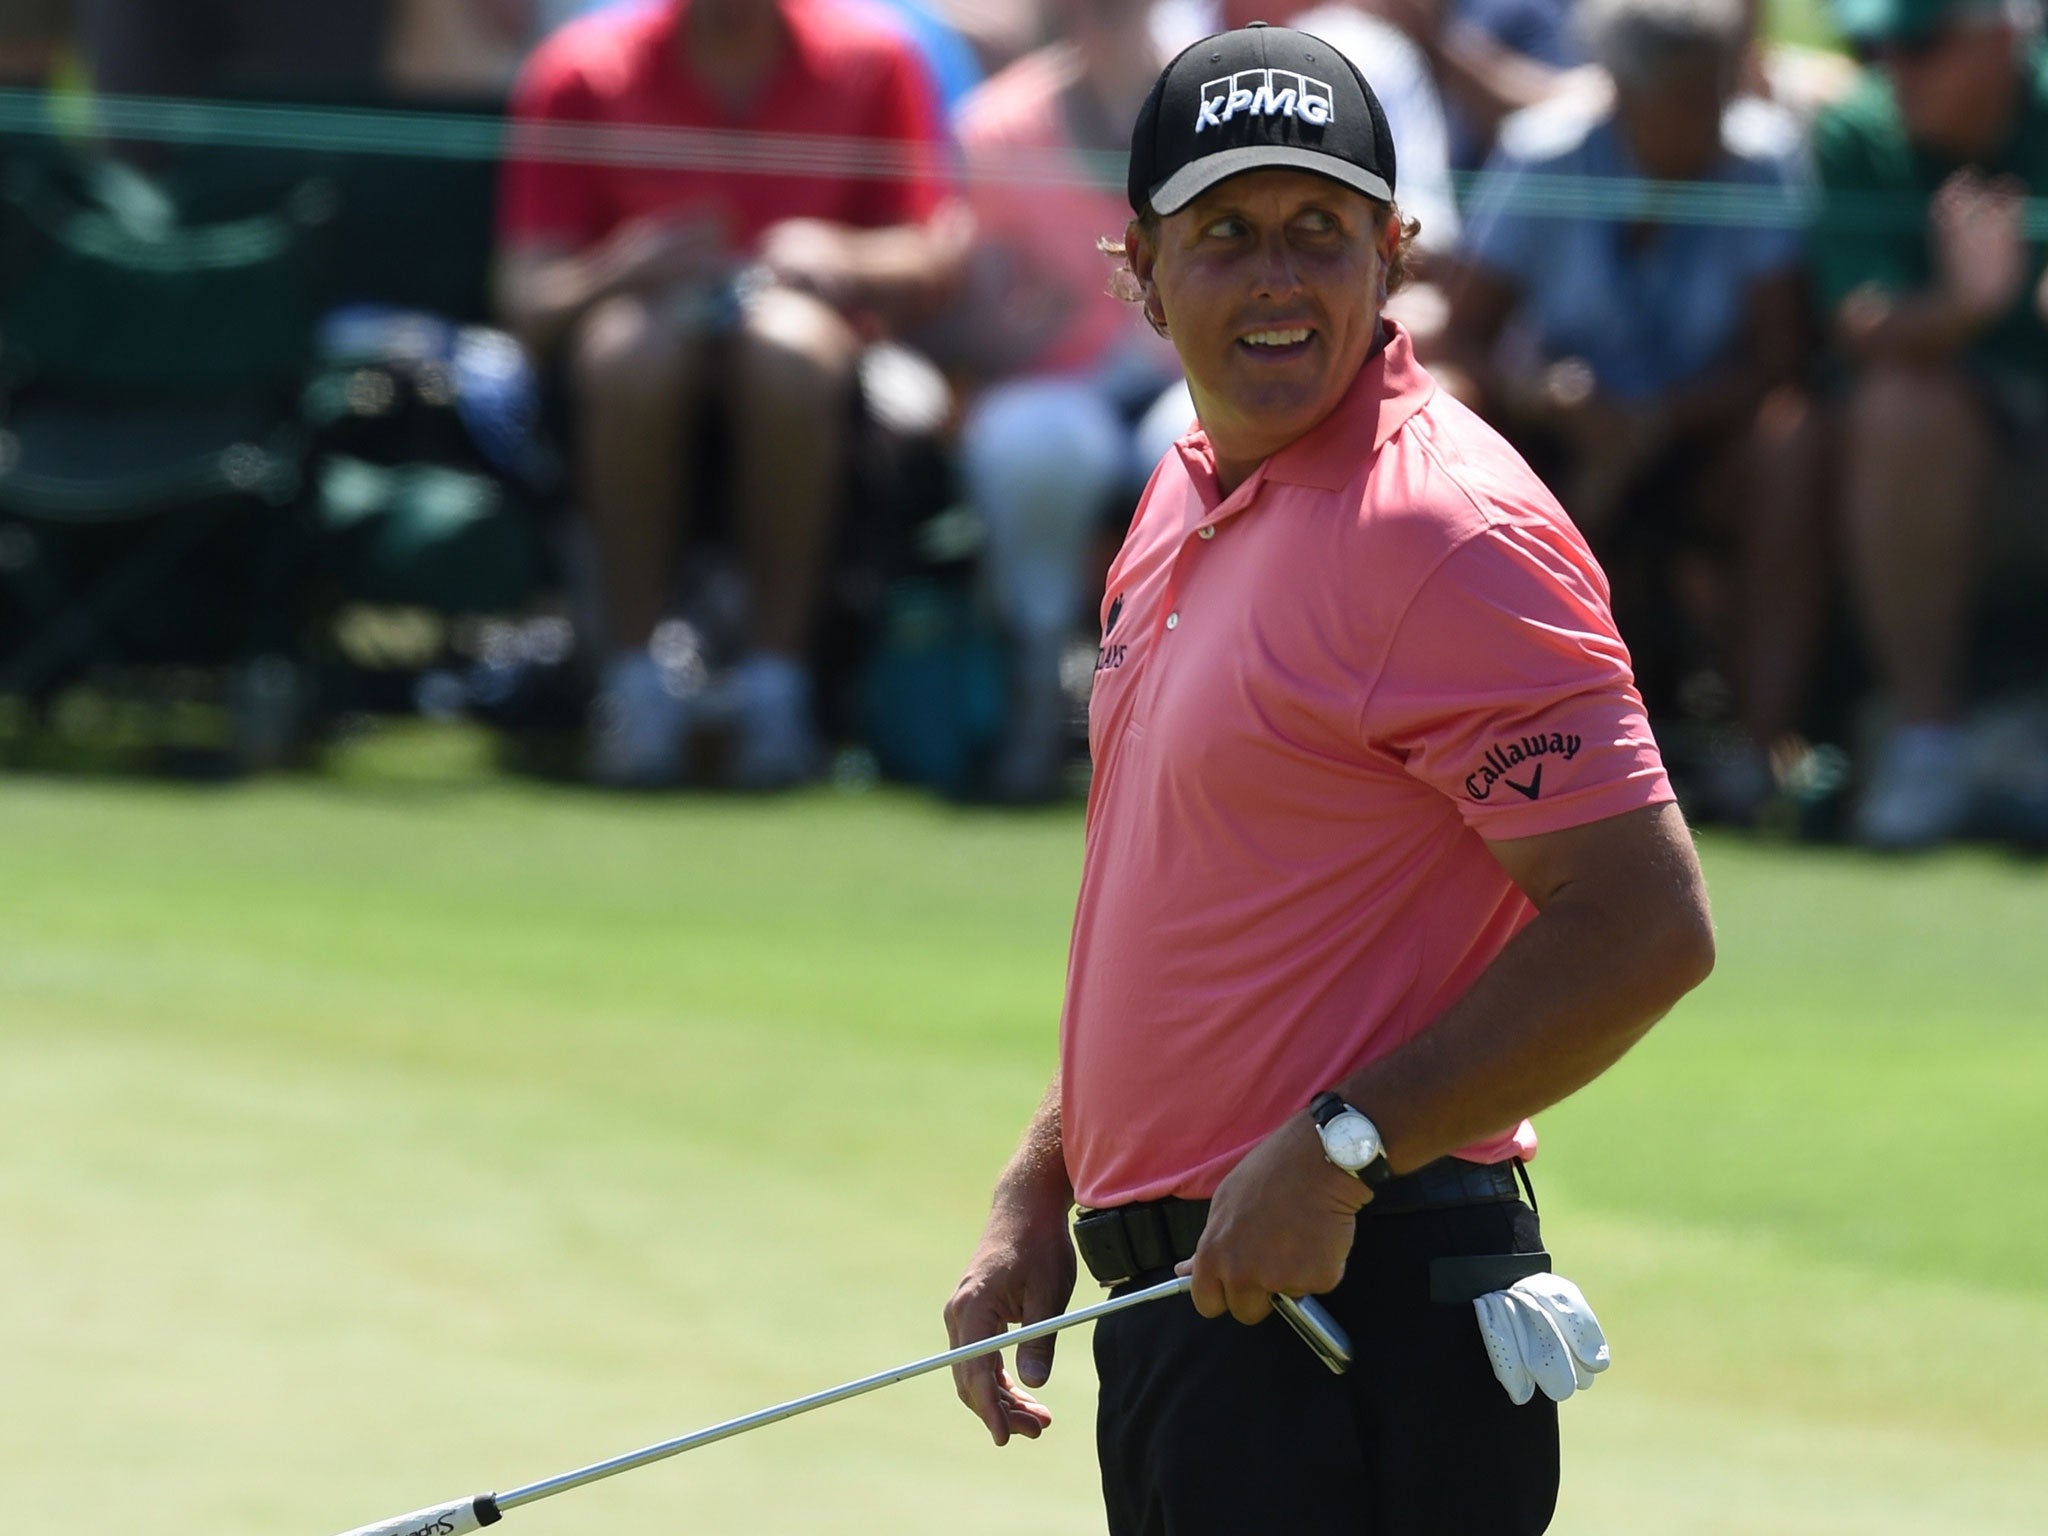 Phil Mickelson was an early mover as he birdied two, three and four